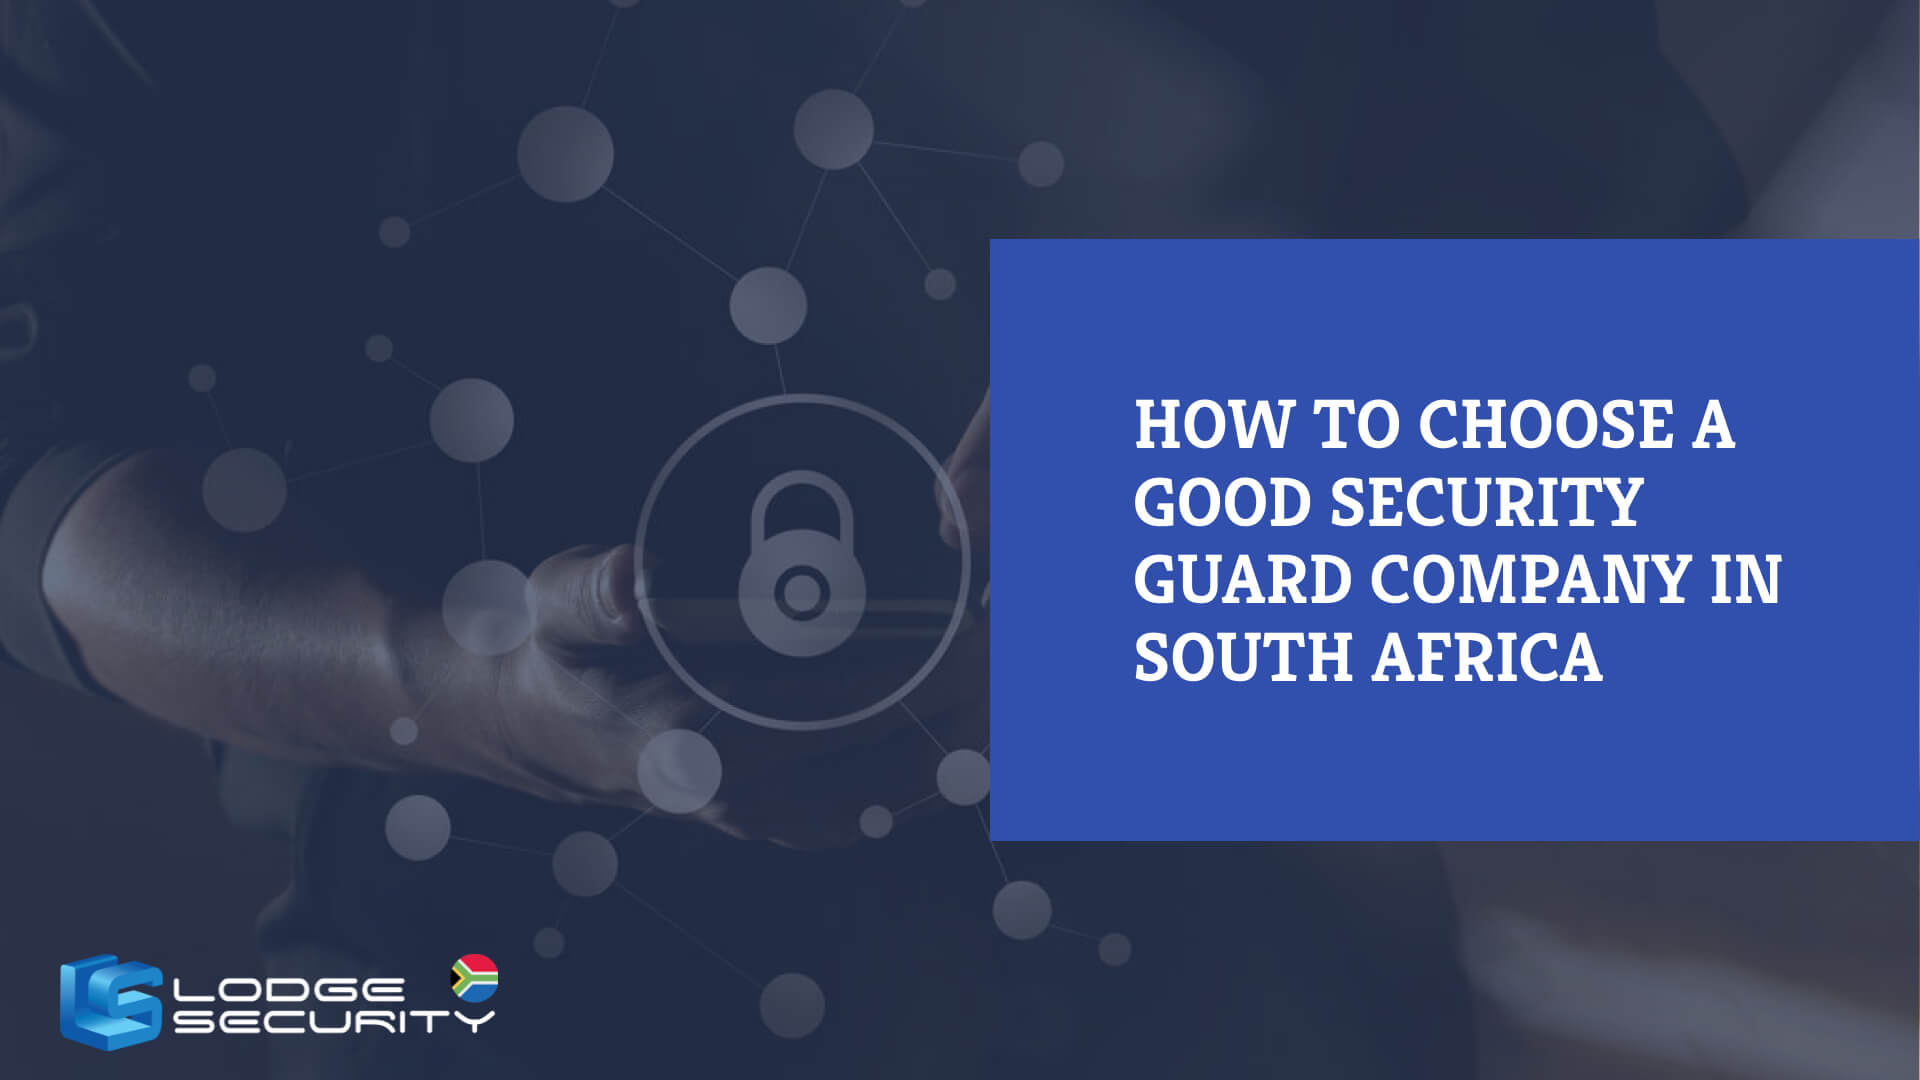 How to choose a good security guard company in South Africa